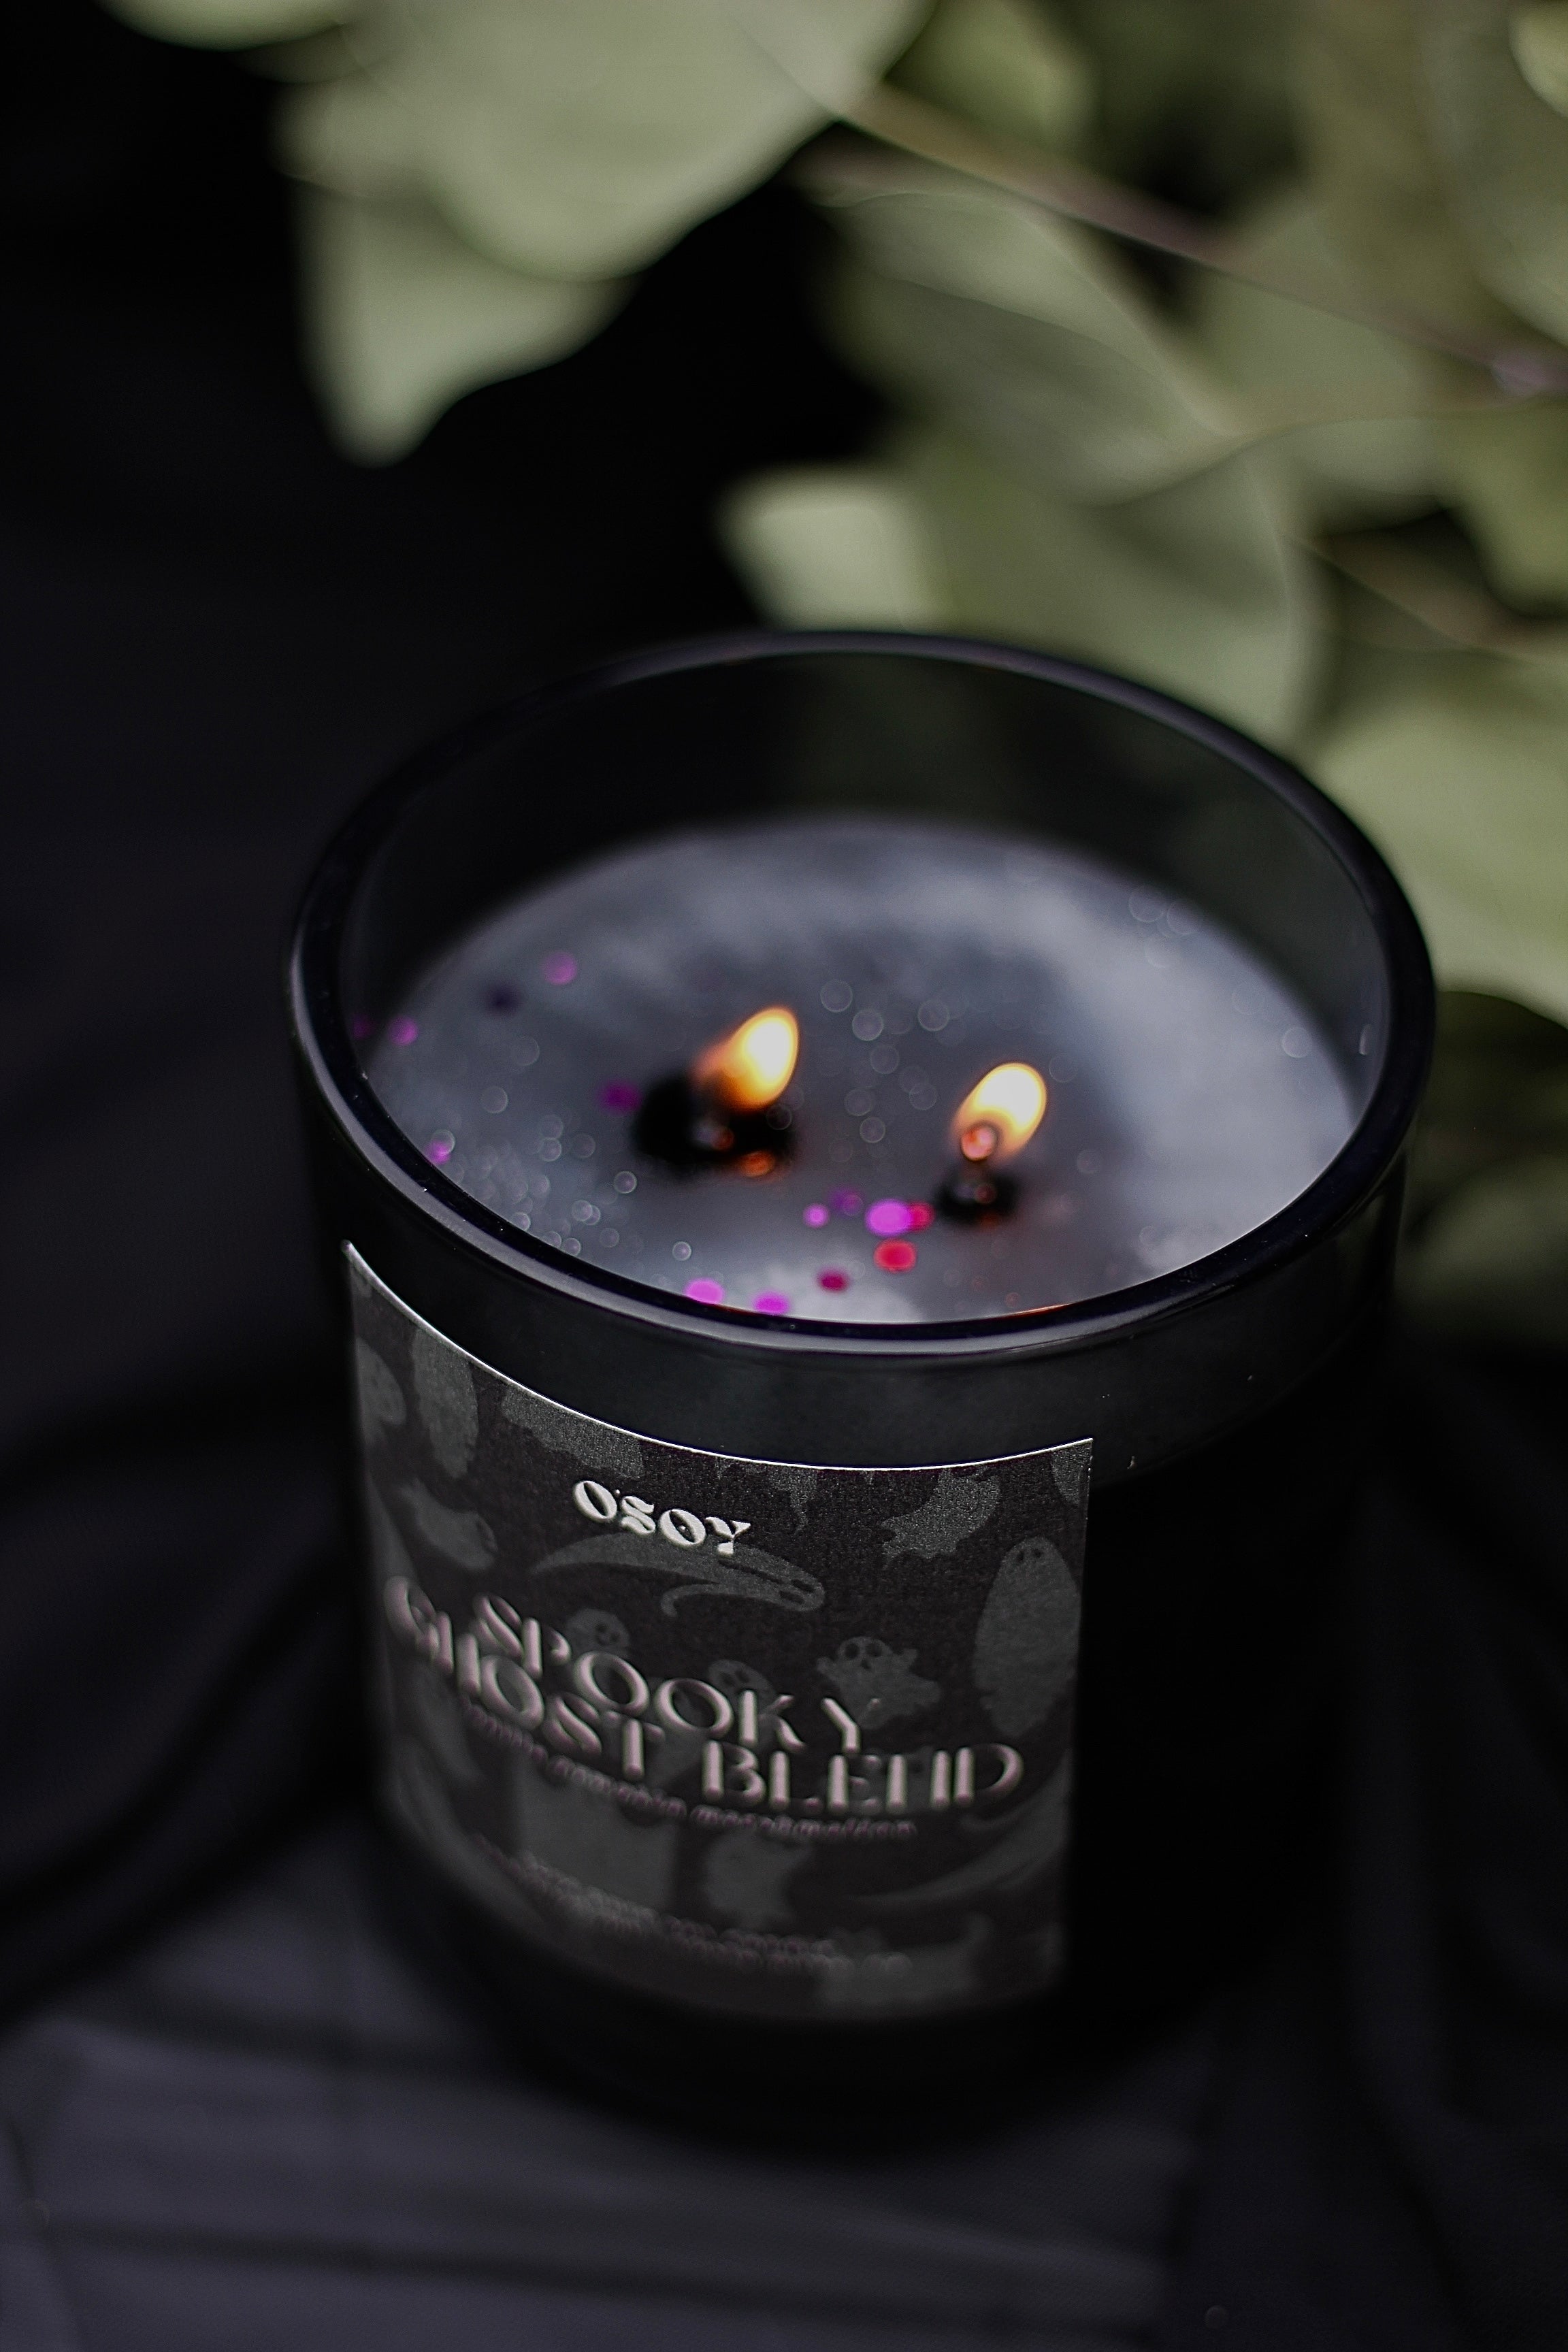 Spooky Ghost Blend- 12oz Soy Candle